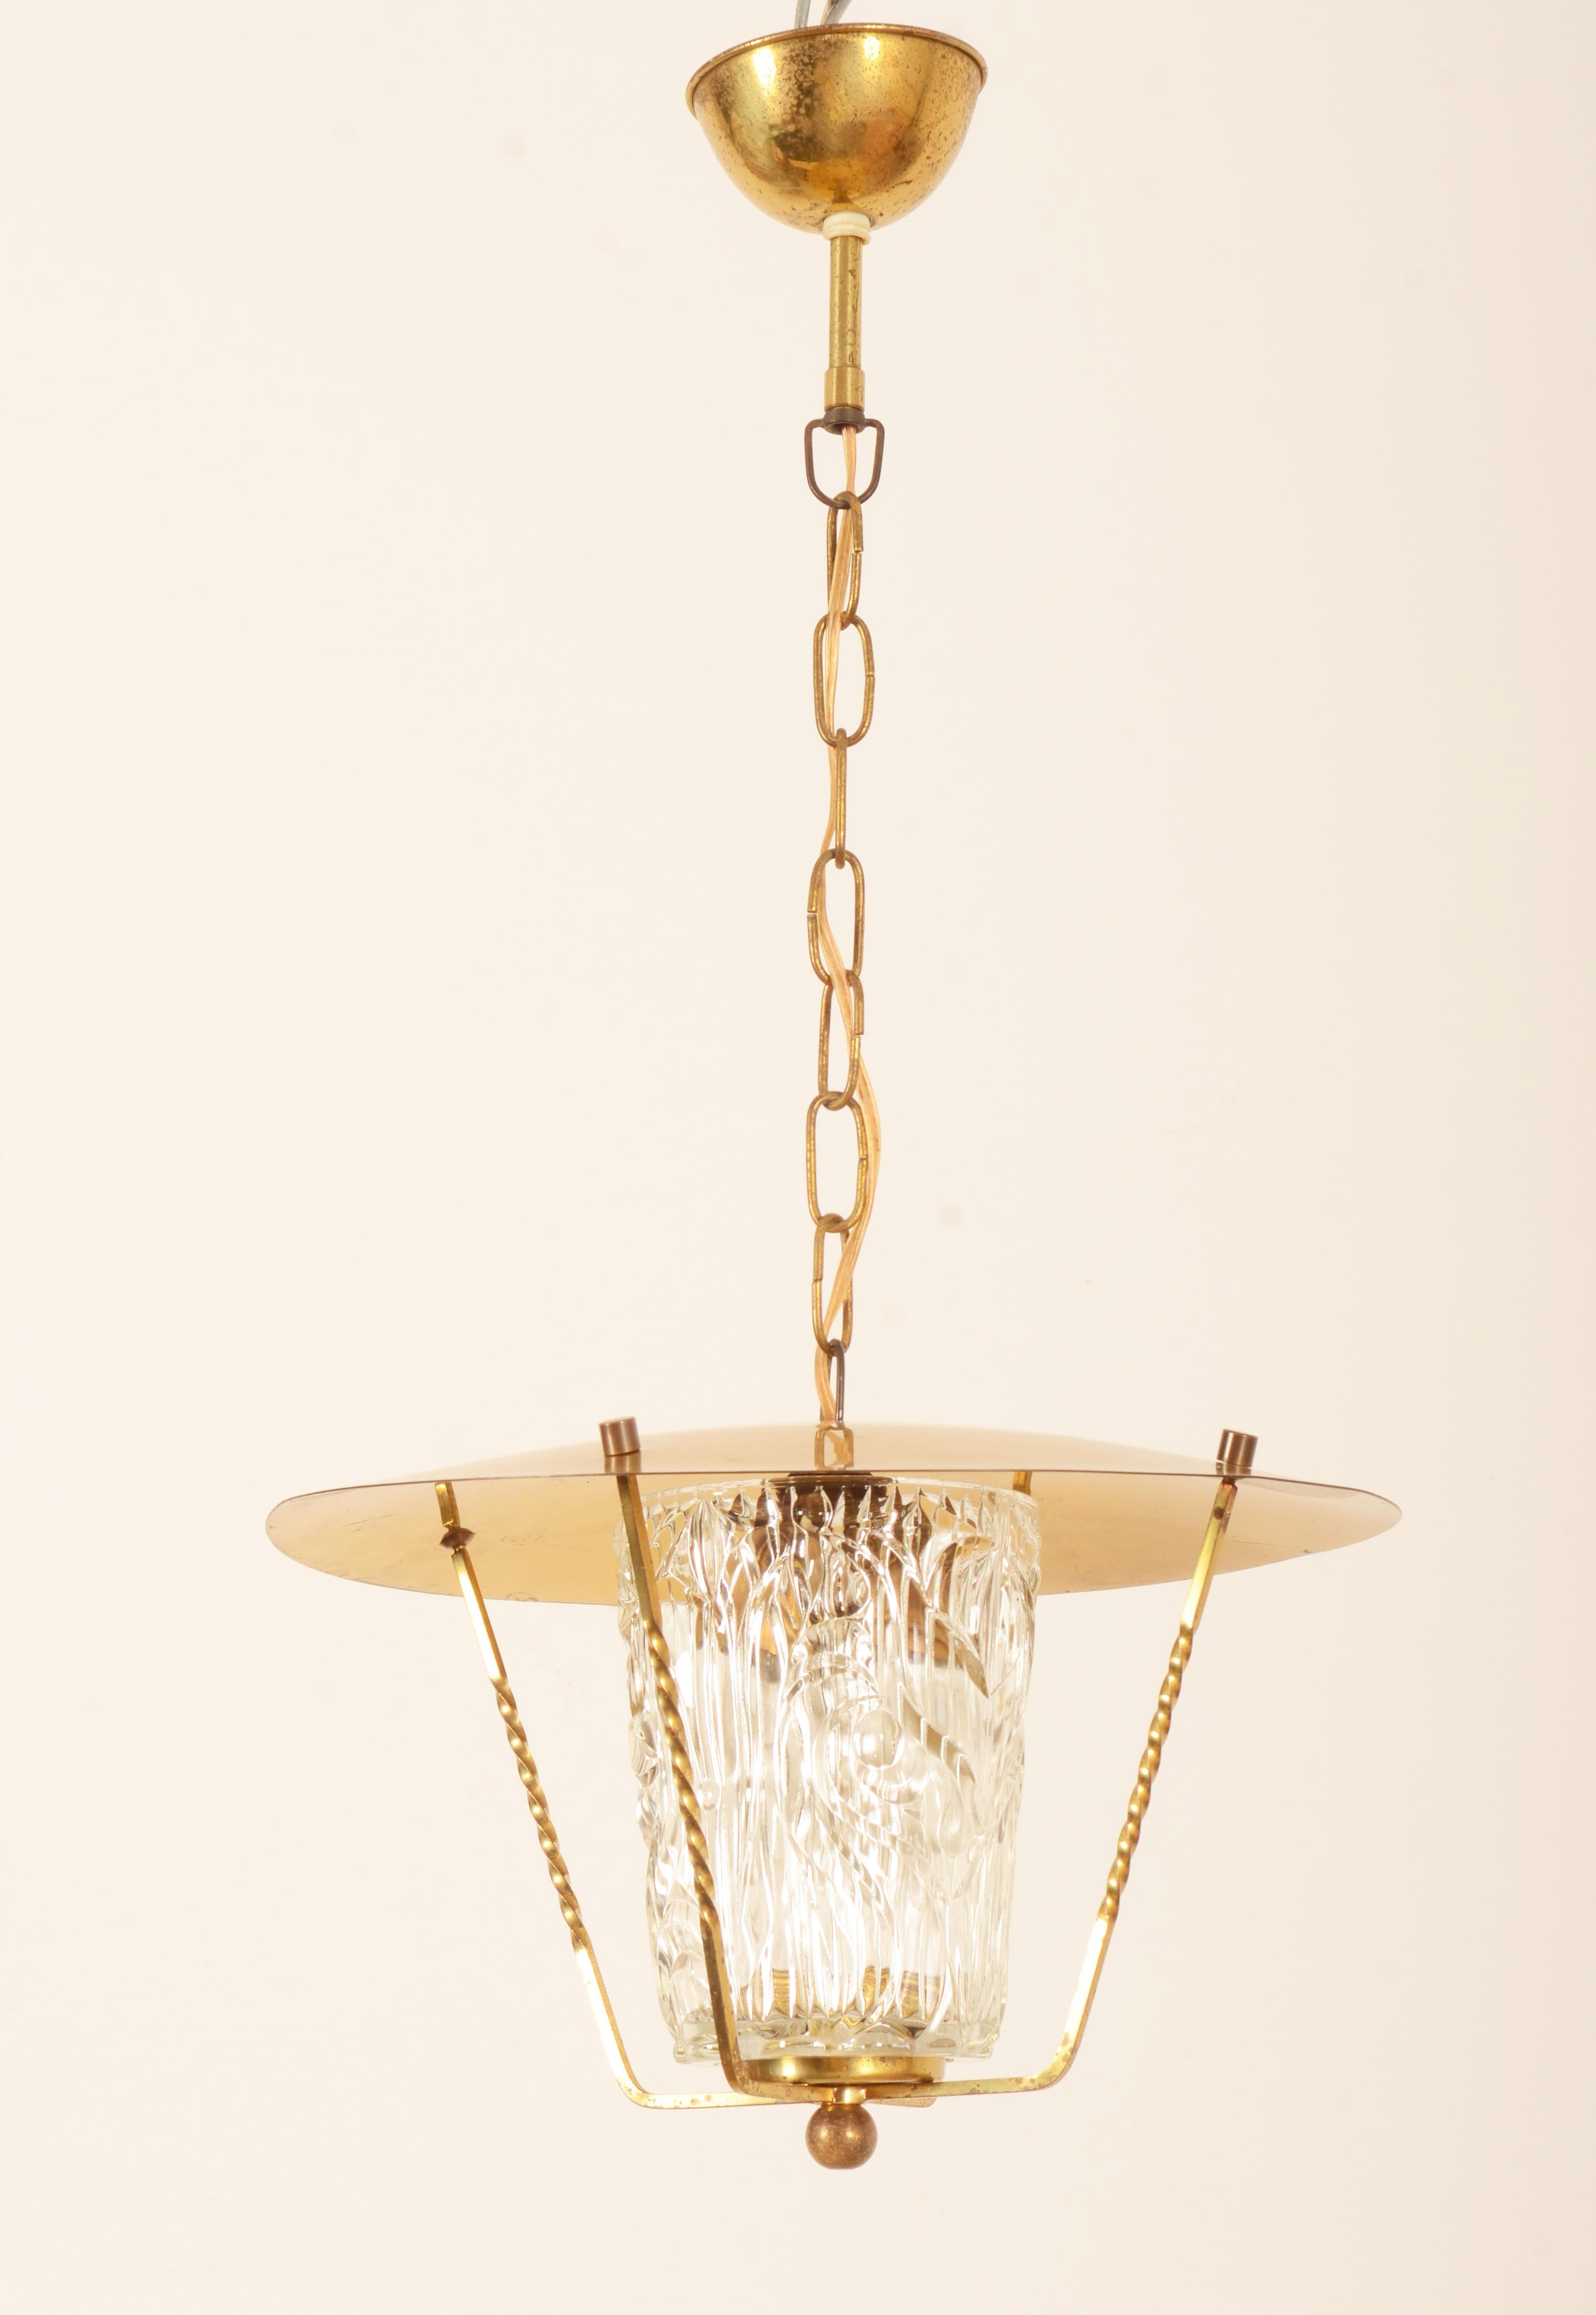 Mid-Century Modern Midcentury Brass Pendant Lamp With Structured Glass Shade  For Sale